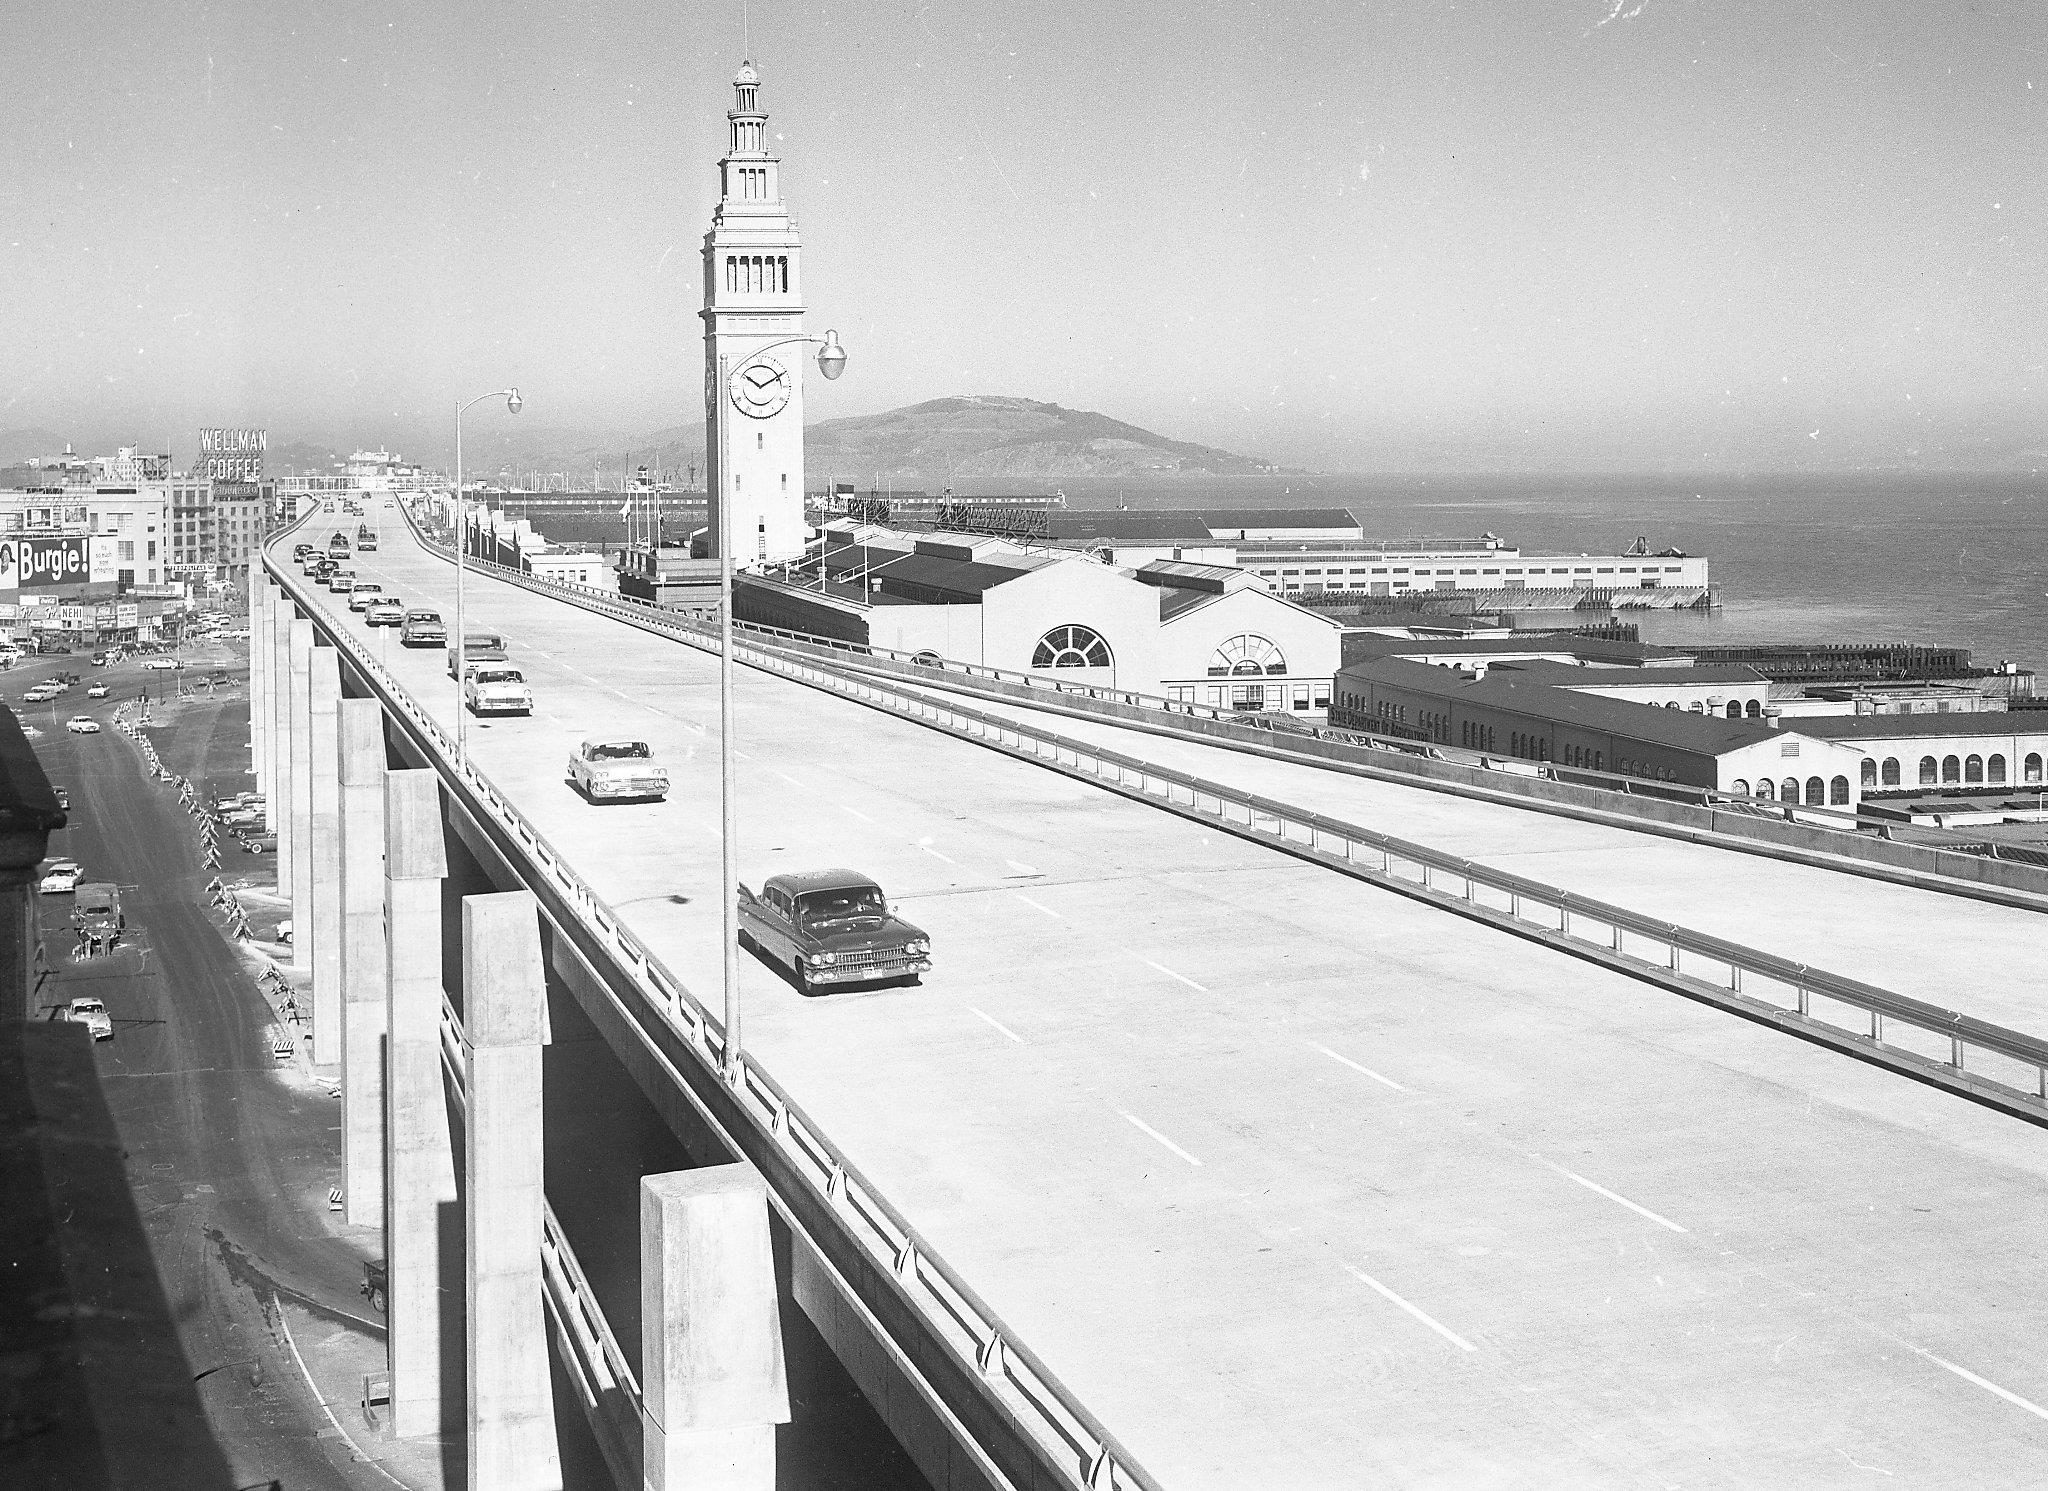 A monstrous mistake': Remembering the ugliest thing San Francisco ever built